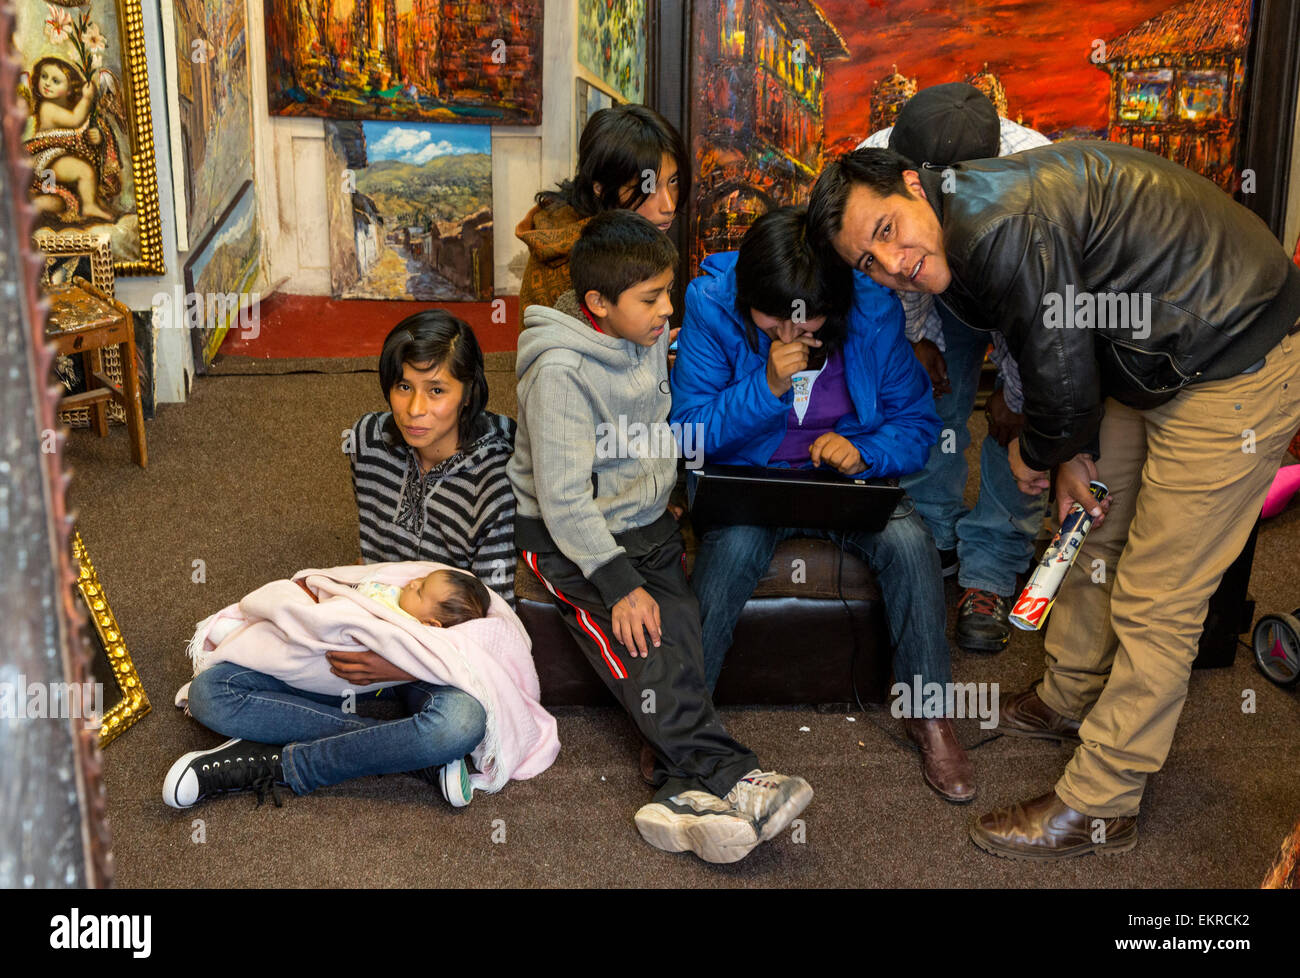 Peru, Cusco.  Family inside a Small Art Gallery Selling Local Artists' Works. Stock Photo